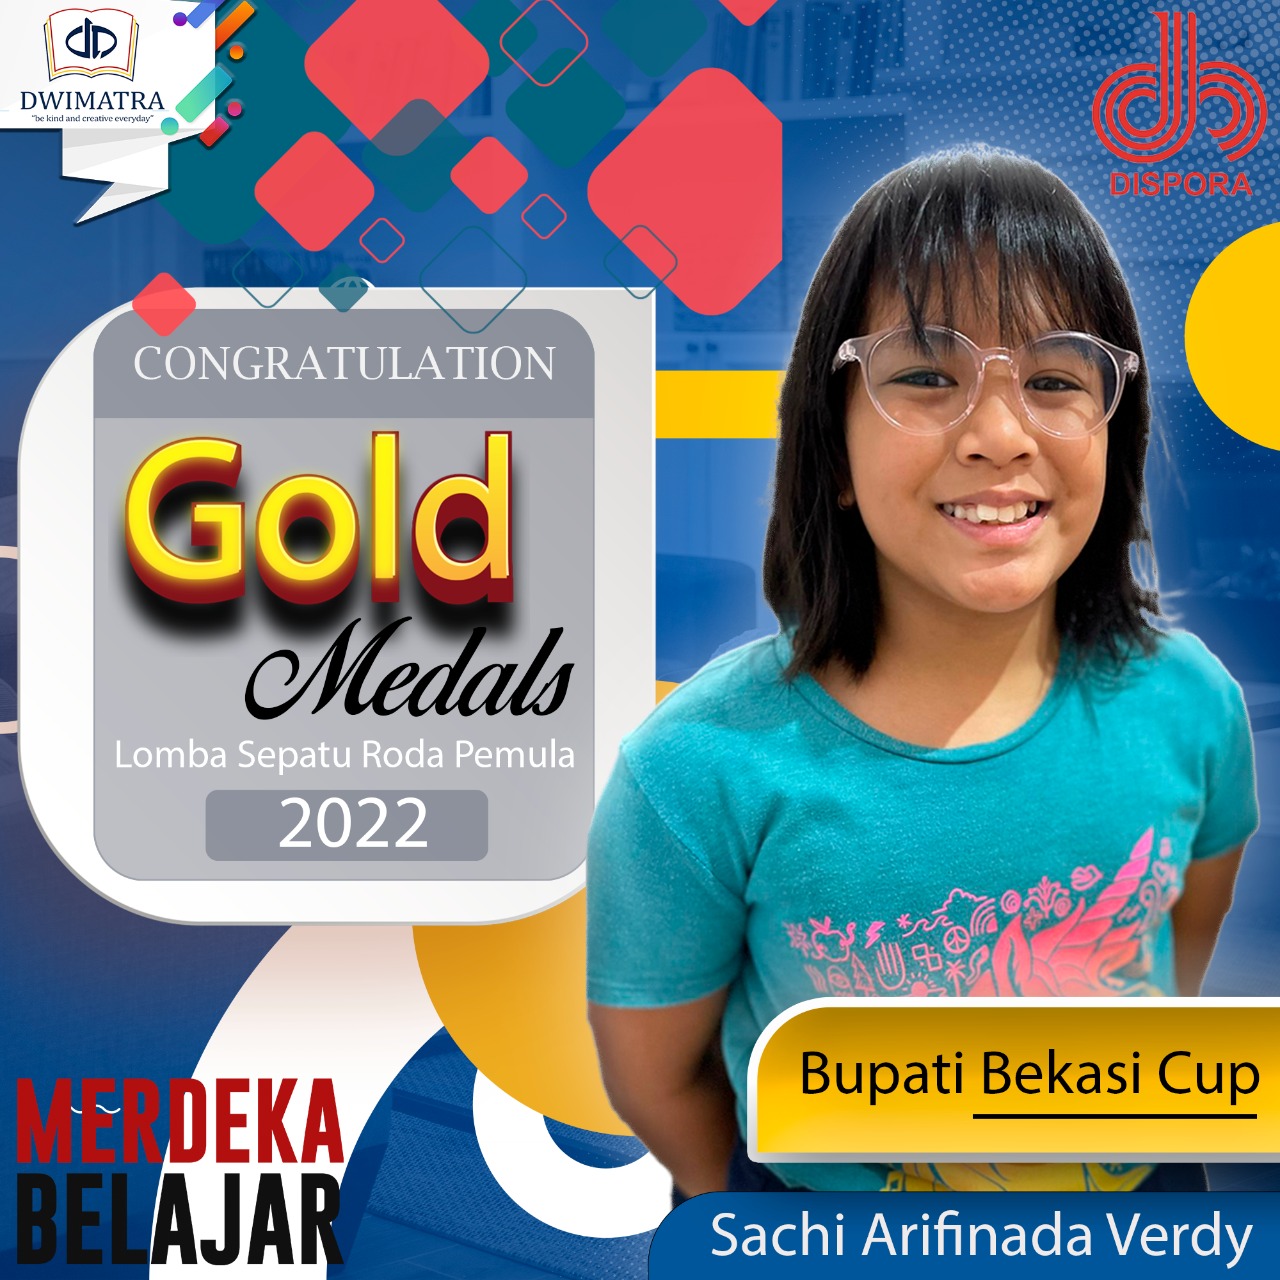 Sachi Arifinada Verdy has been awarded as gold medals winner in beginner roller skates competition.